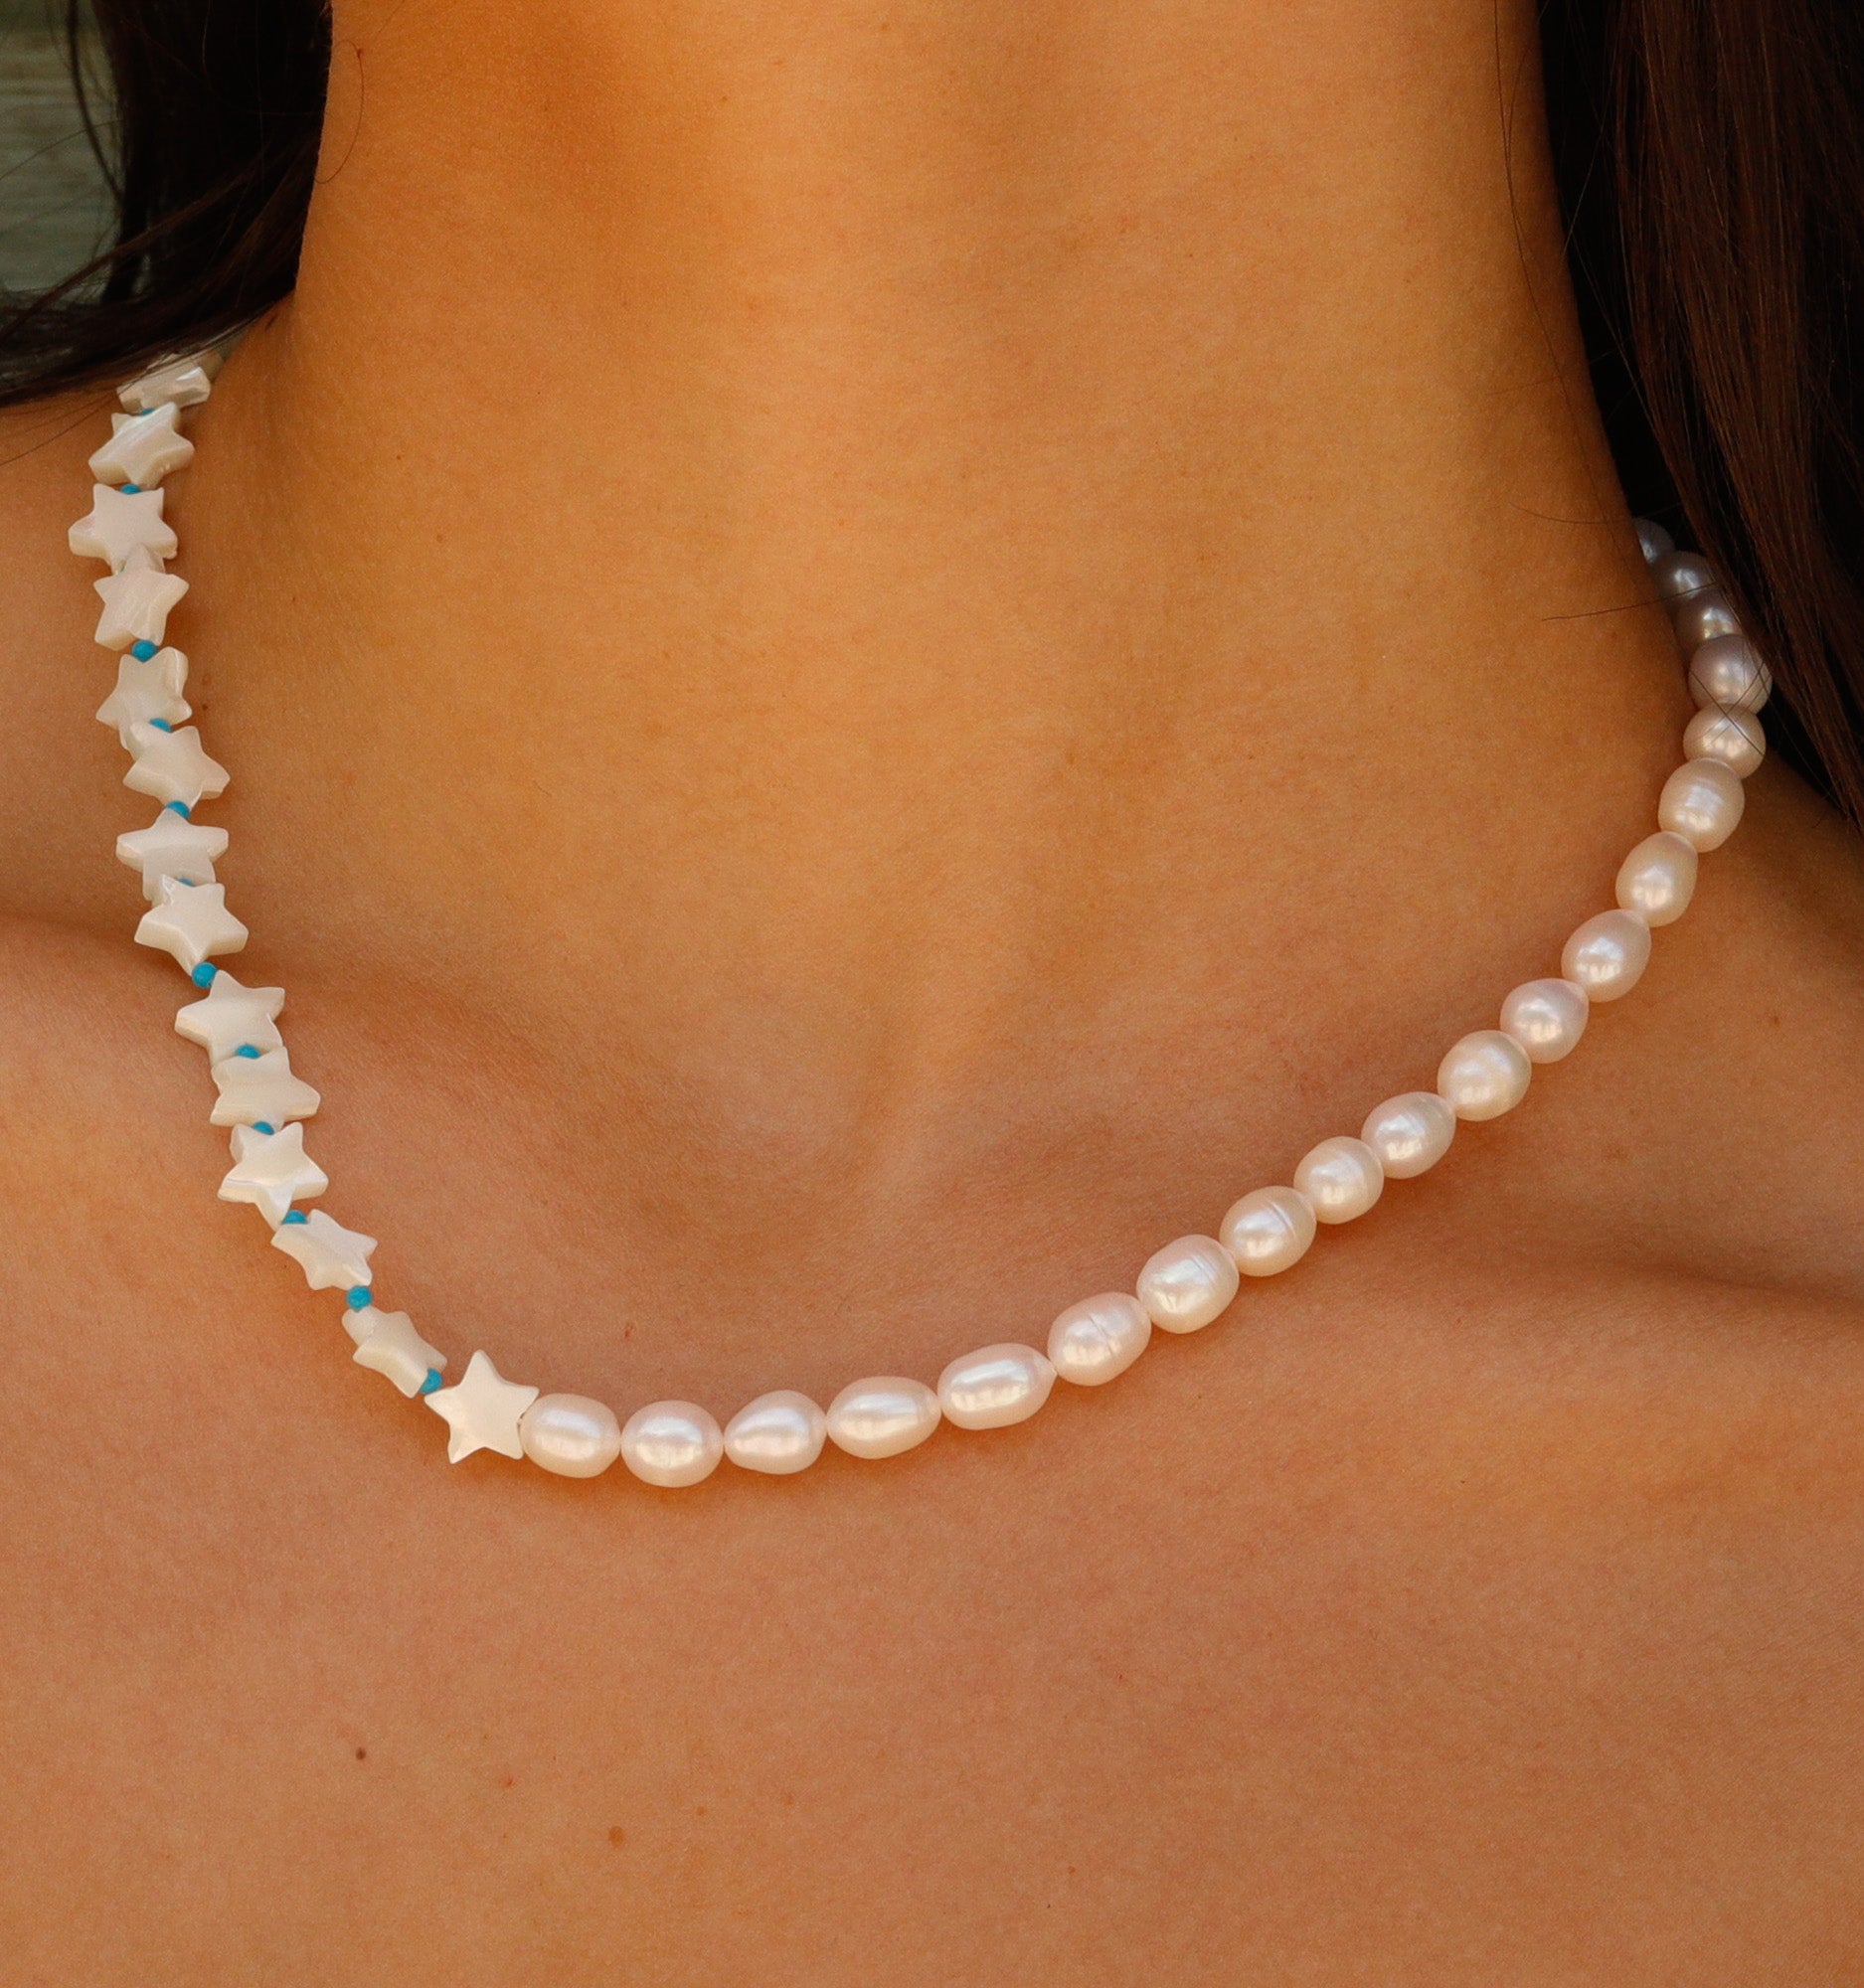 Victorian Crescent and Star Pearl Necklace With Detachable Pendant